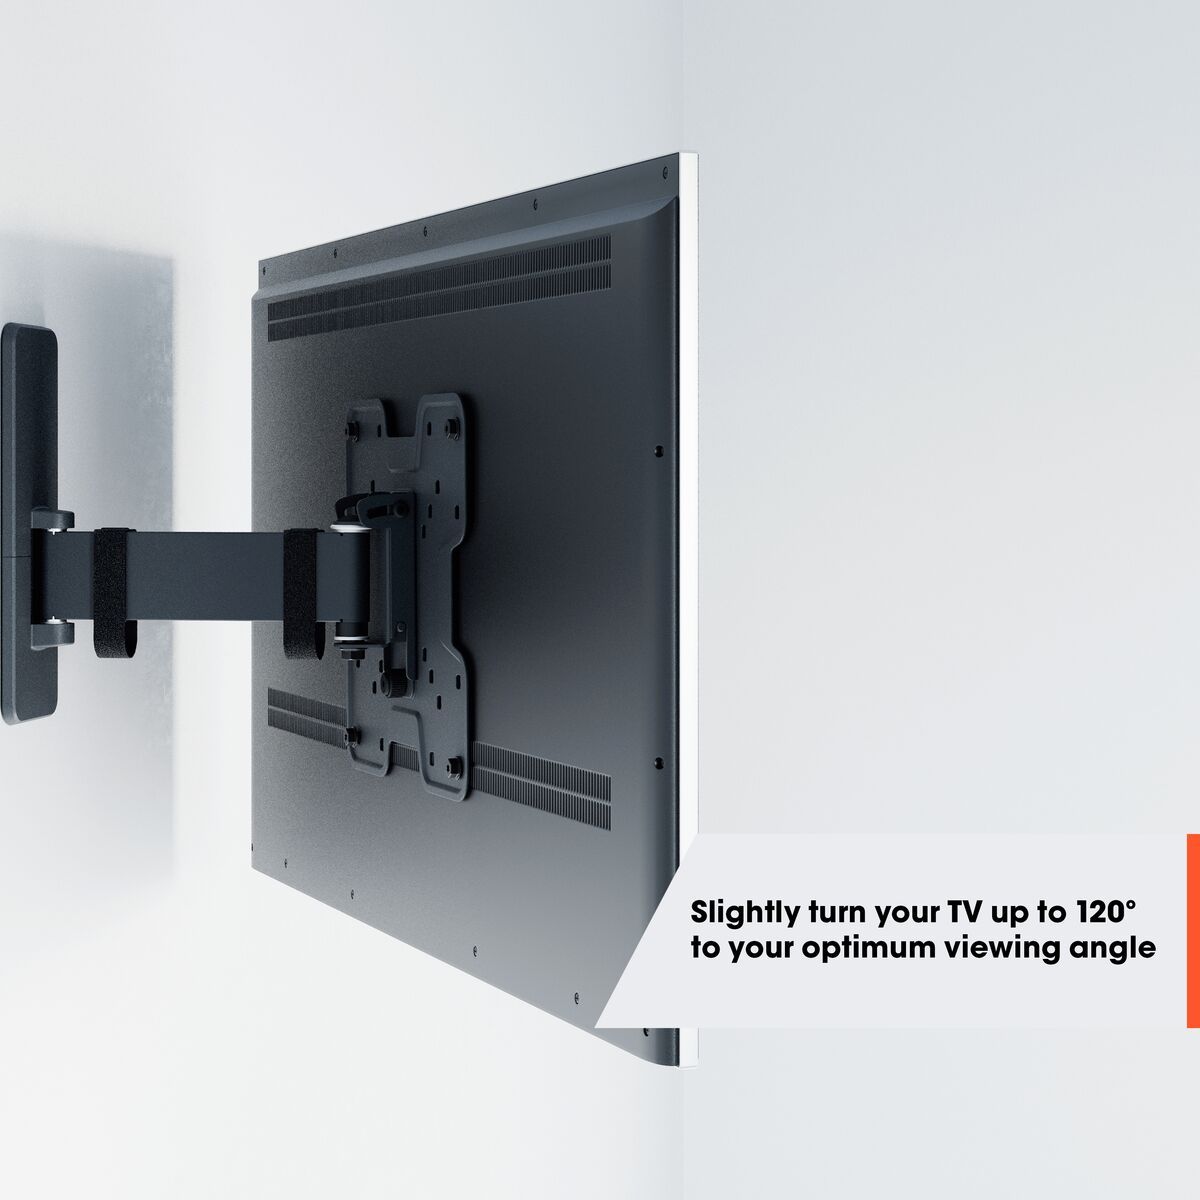 Vogel's TVM 1625 Full-Motion TV Wall Mount - Suitable for 40 up to 77 inch TVs - Motion (up to 120°) swivel - Tilt up to 15° - USP